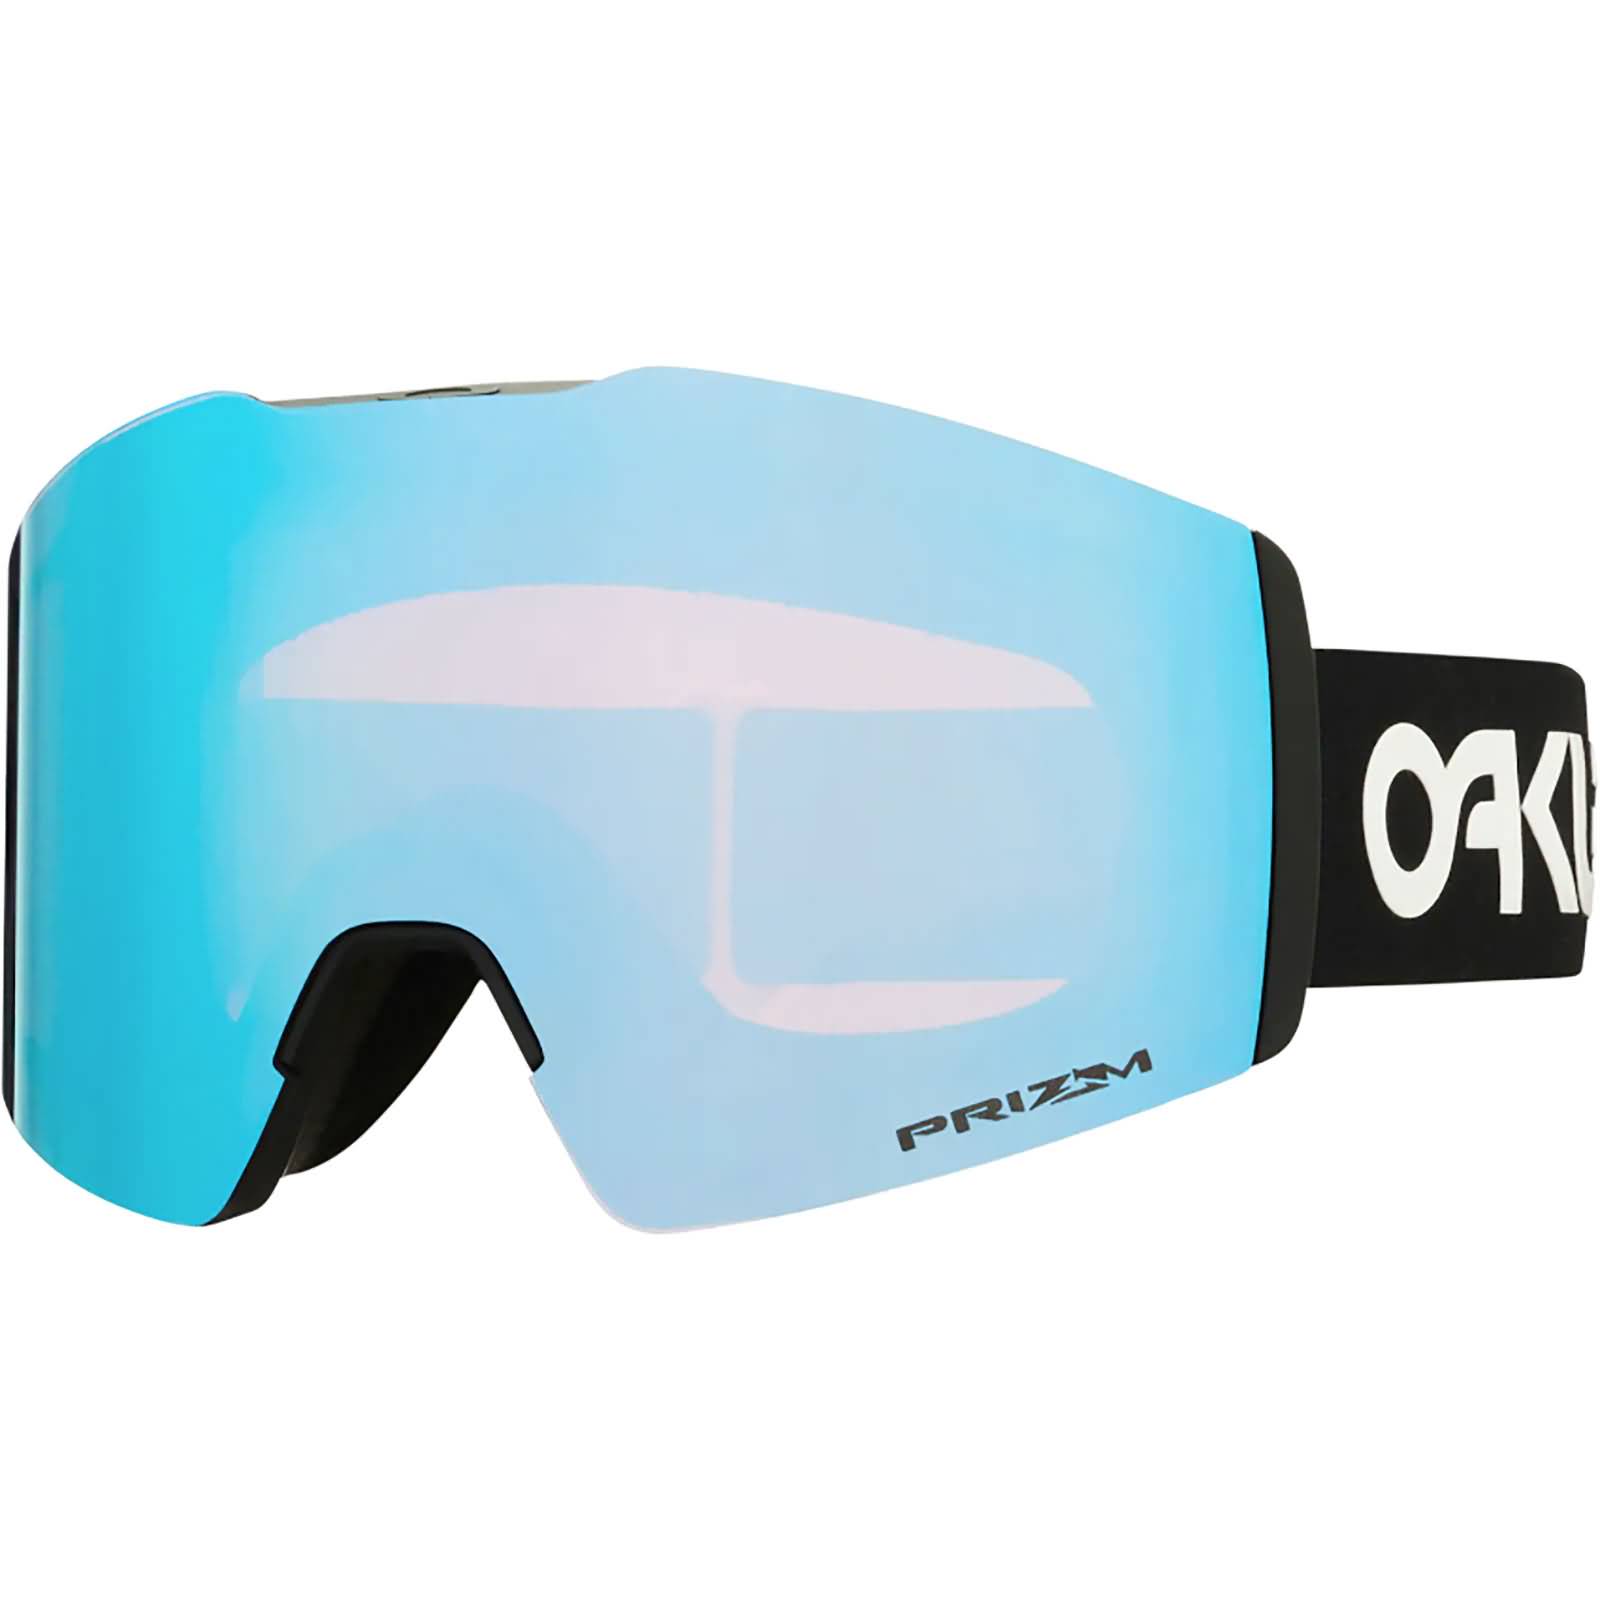 Oakley Fall Line XM Factory Pilot Prizm Adult Snow Goggles-OO7103